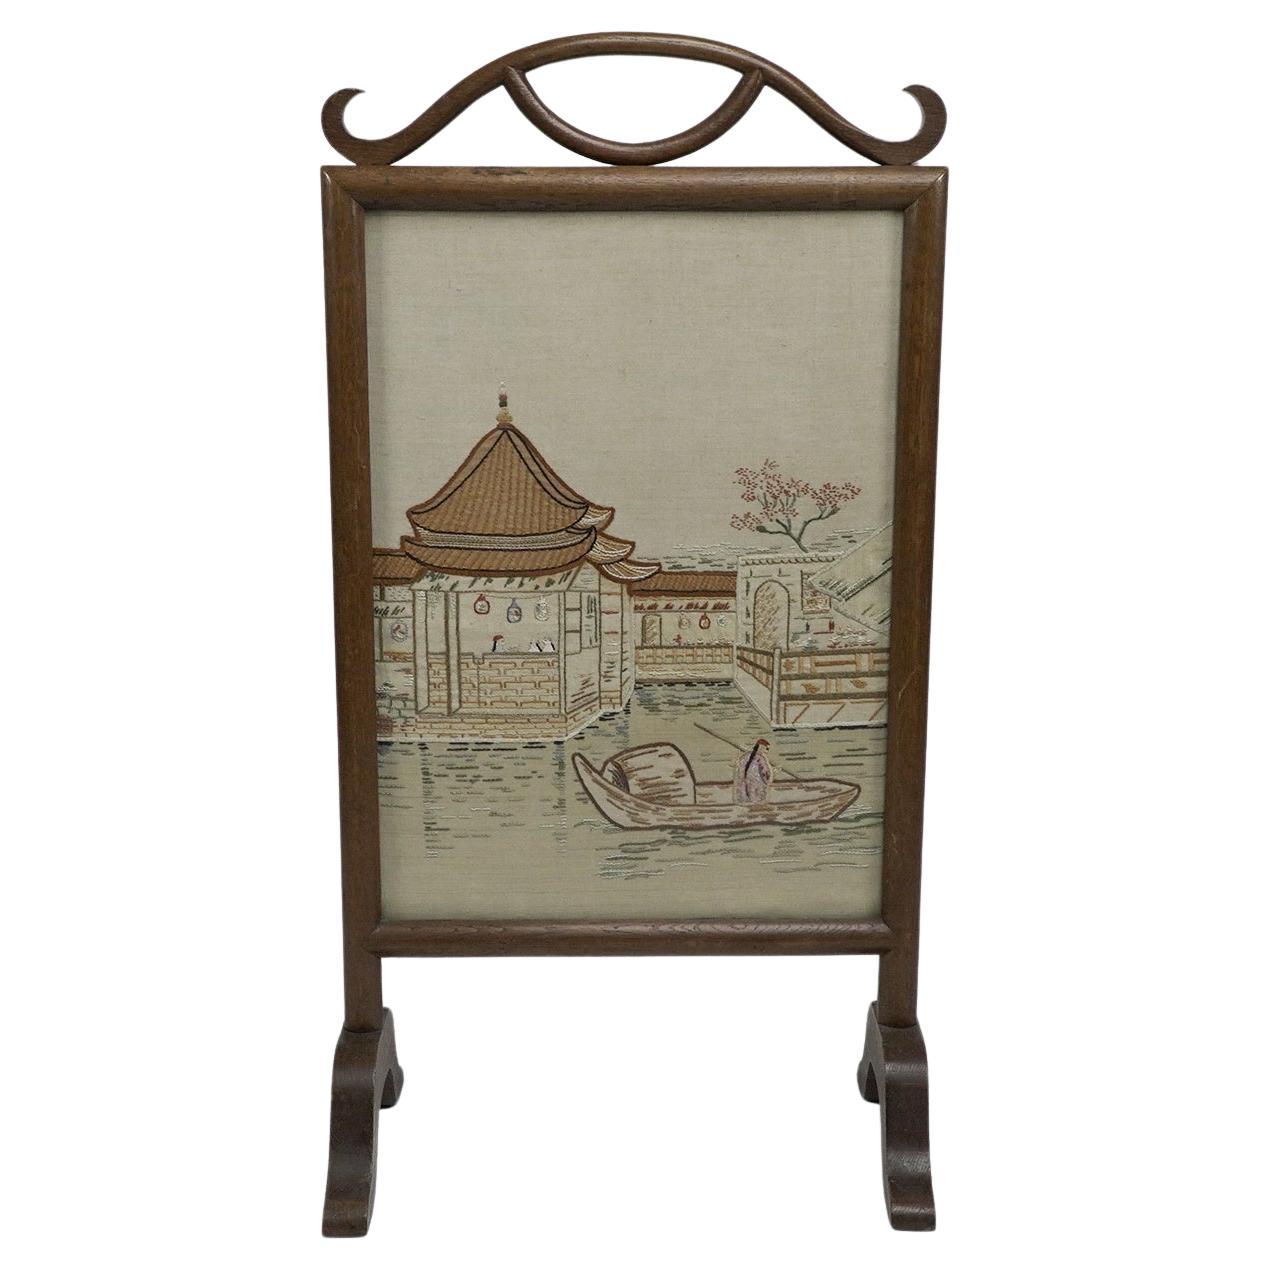 Anglo-Japanese oak firescreen with a Torri gate detail & embroidery river scene. For Sale